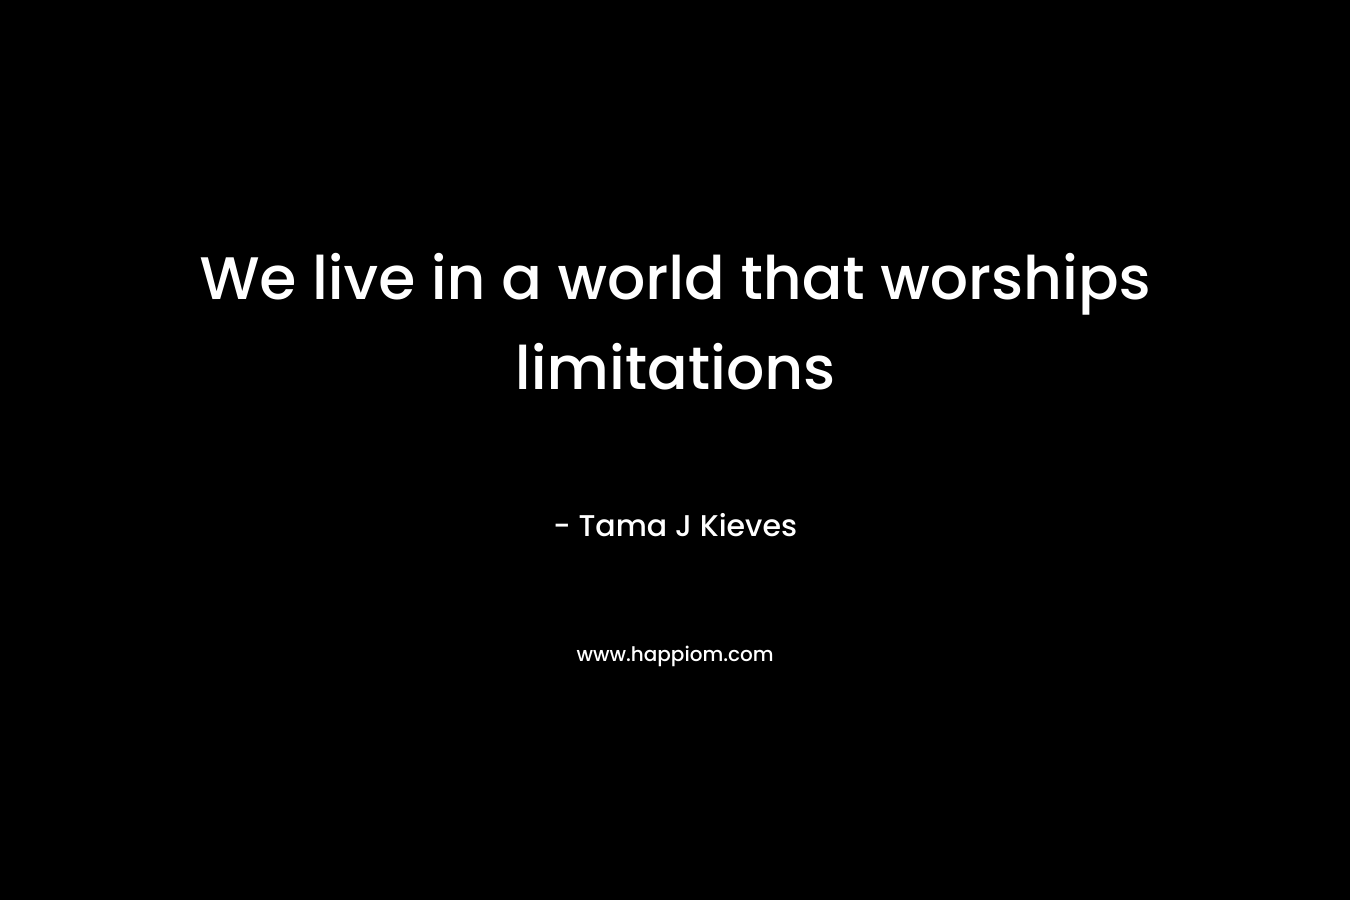 We live in a world that worships limitations